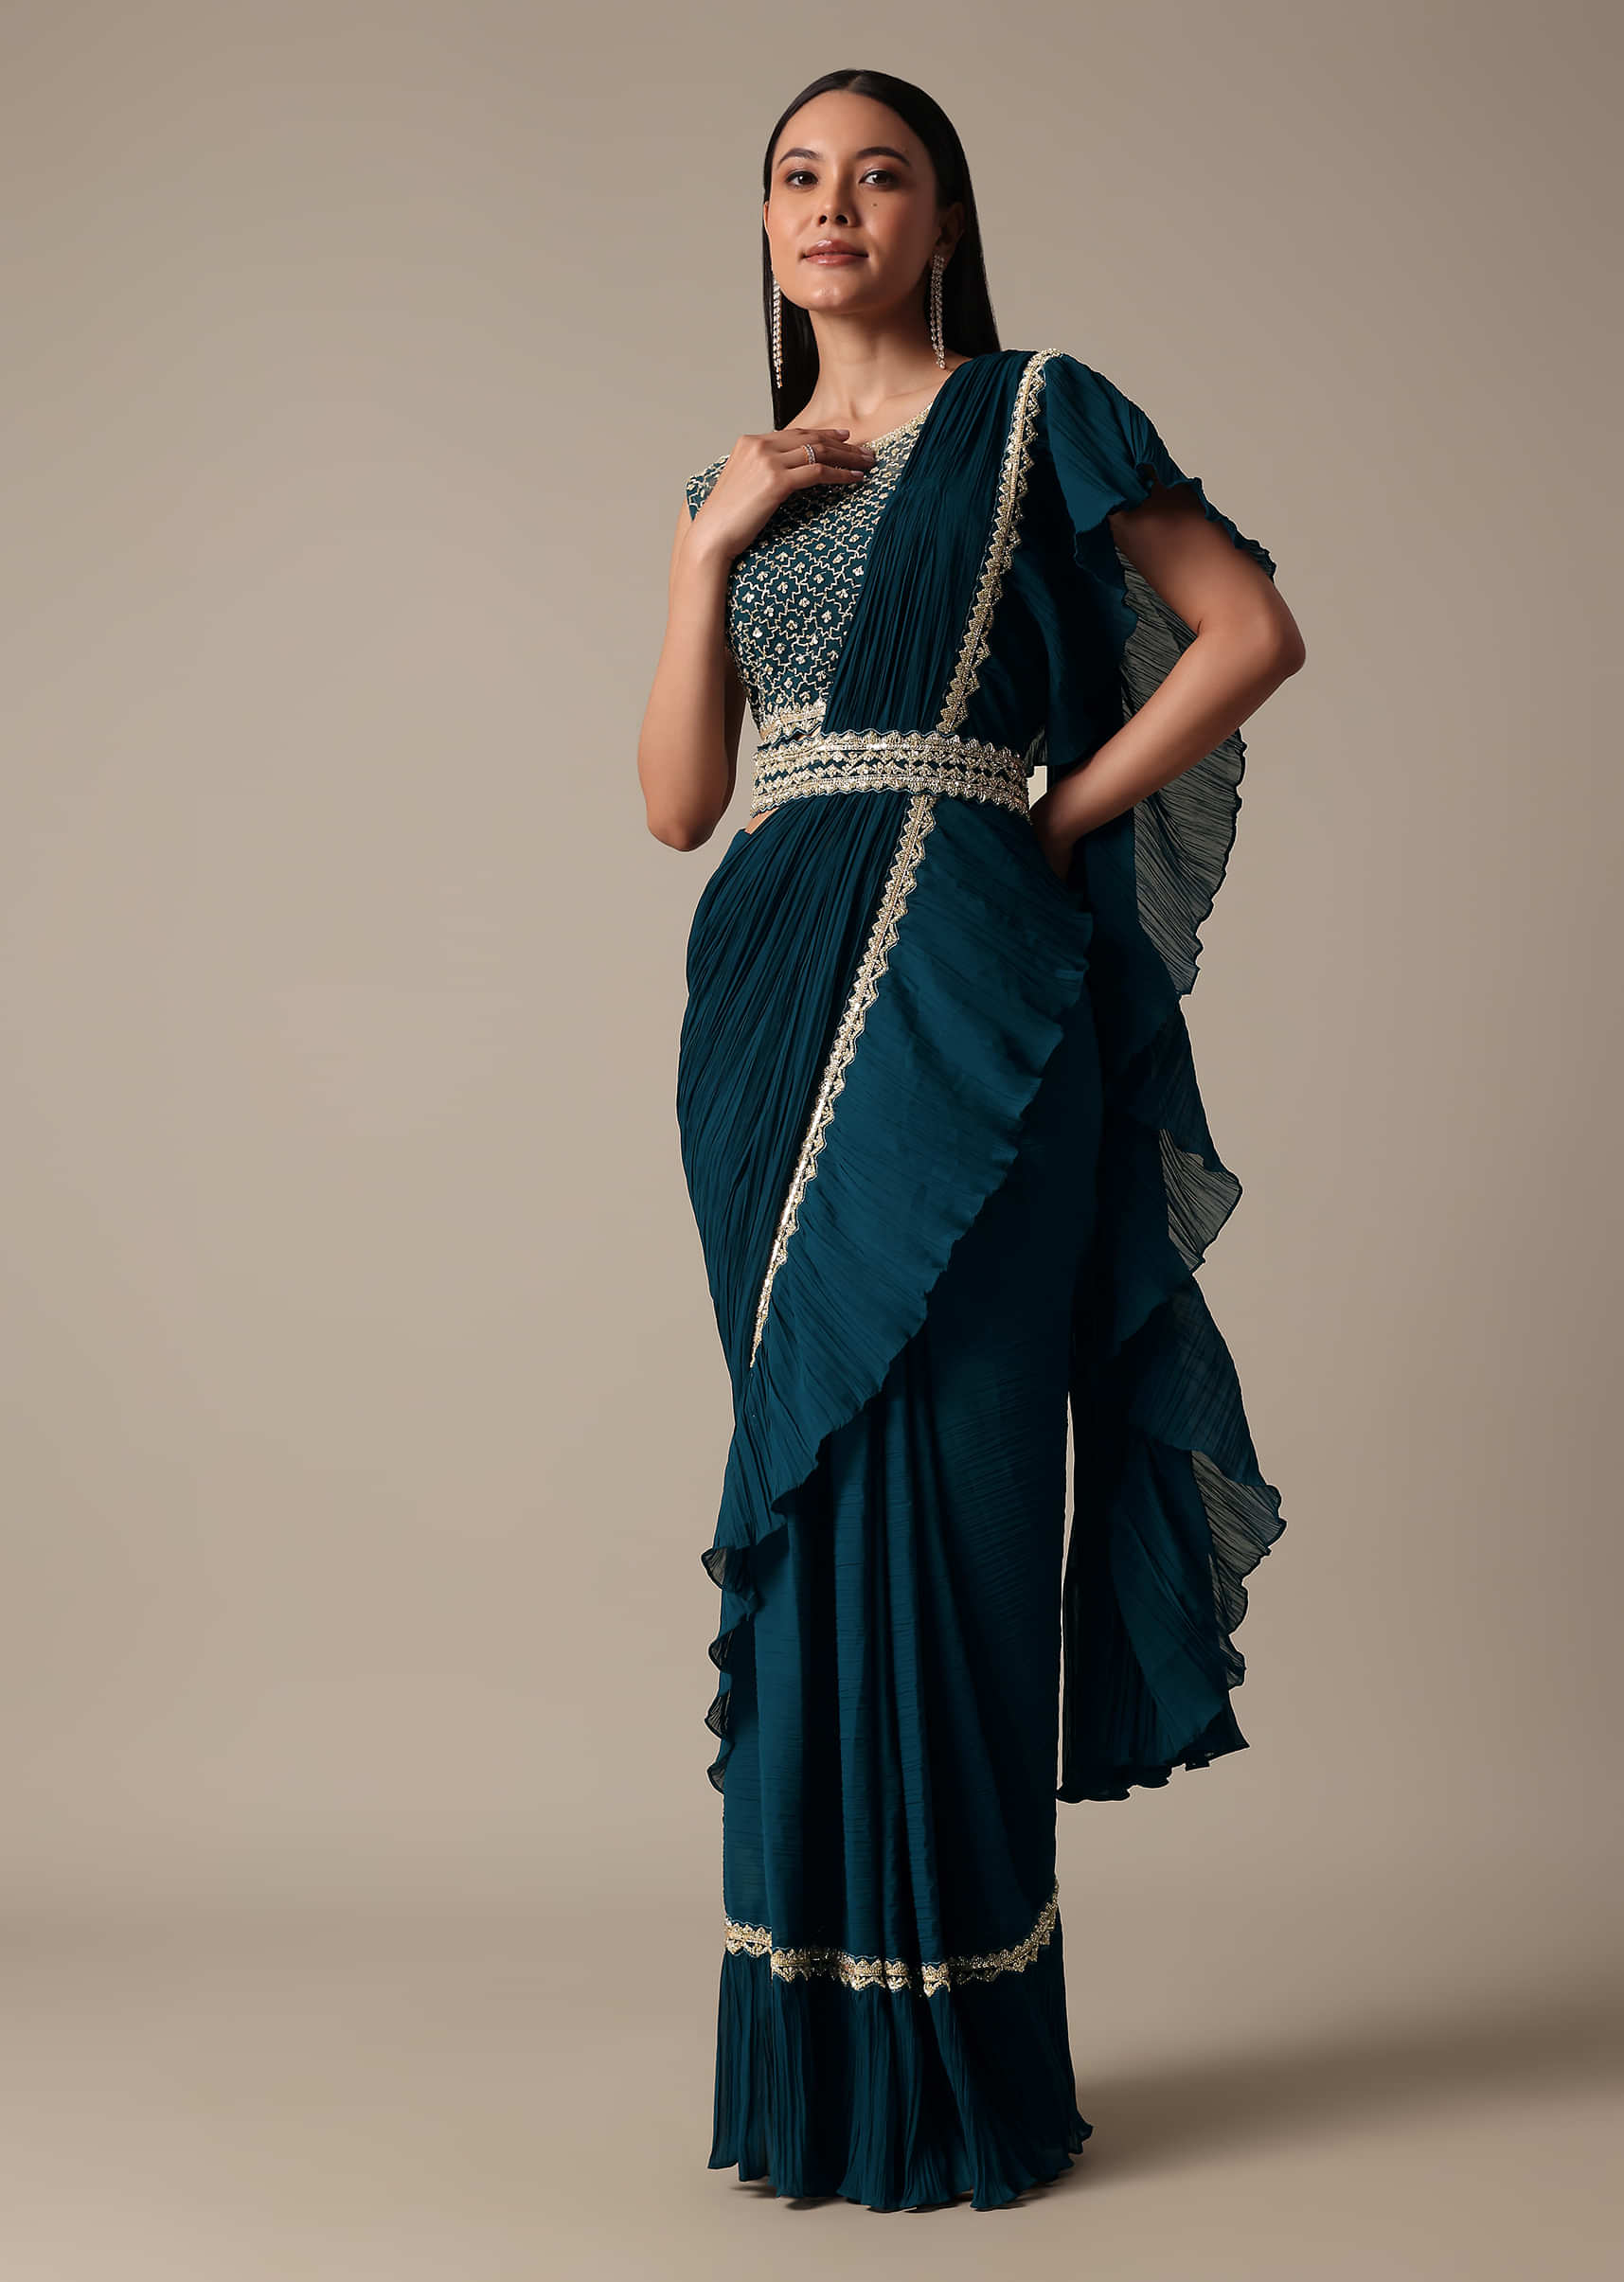 Designer Ready To Wear Saree For Girls| Get Instant Discount